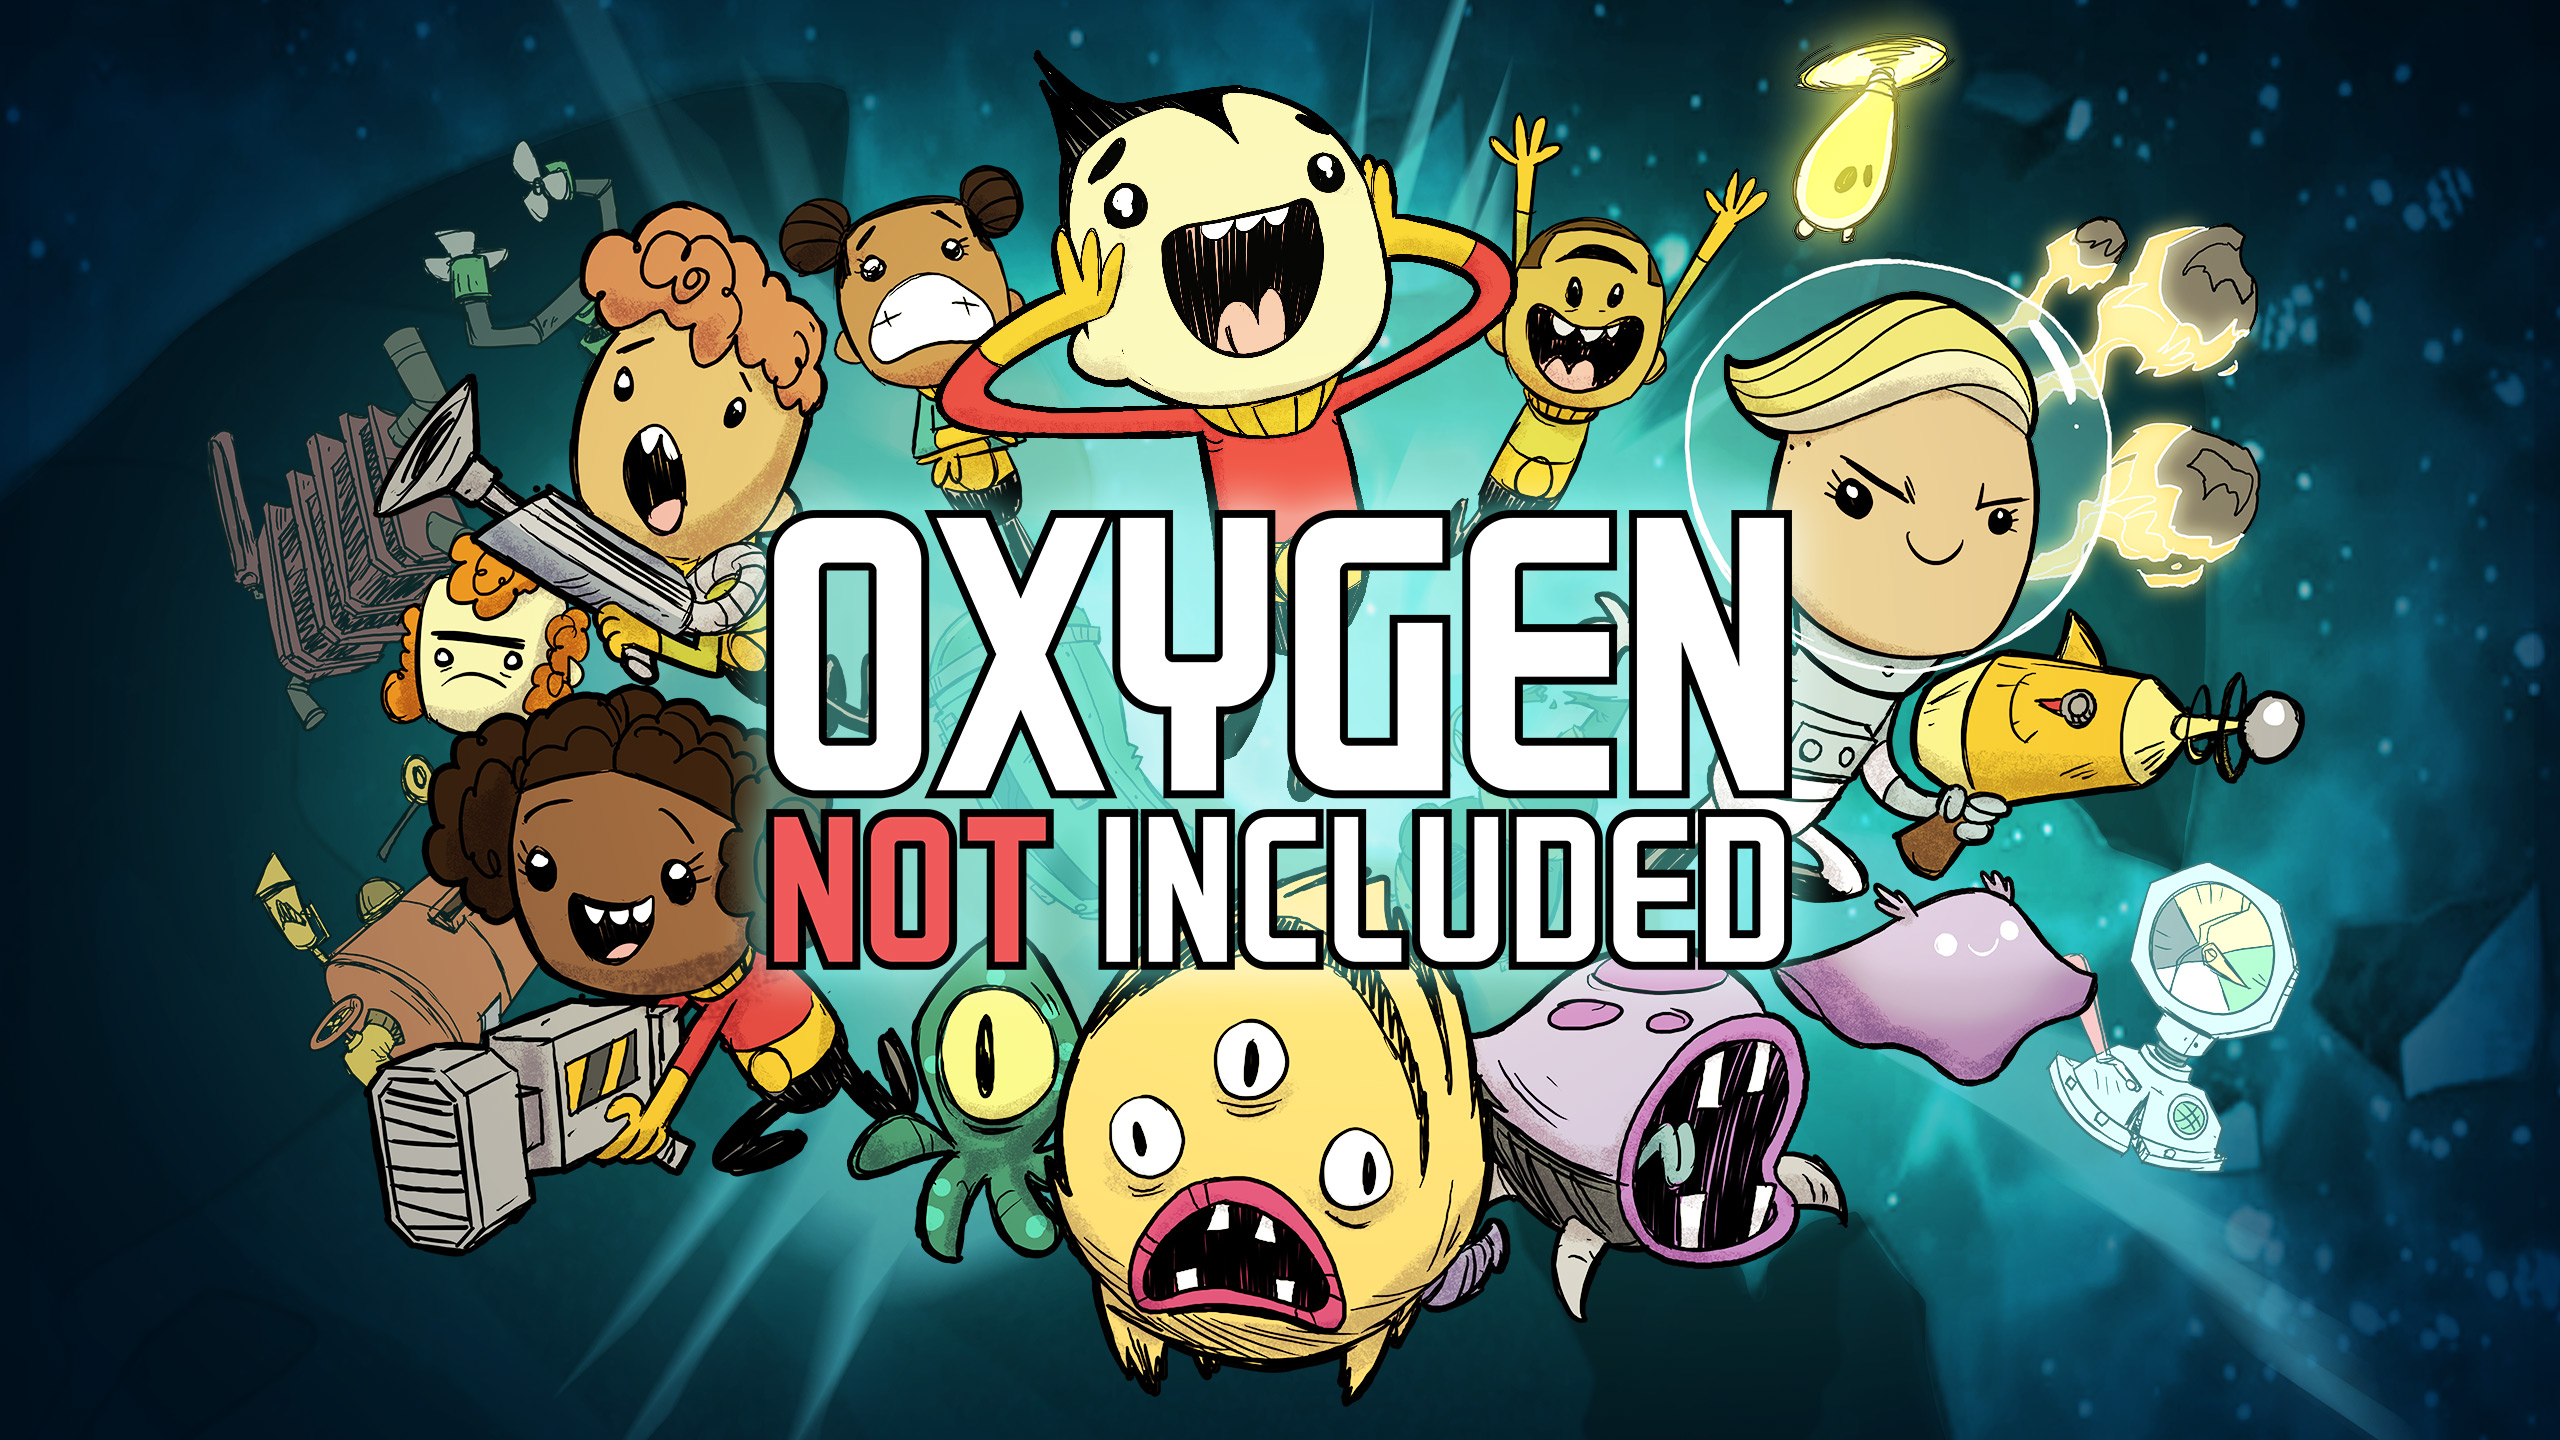 OXYGEN NOT INCLUDED PC Download Free Full Game For windows